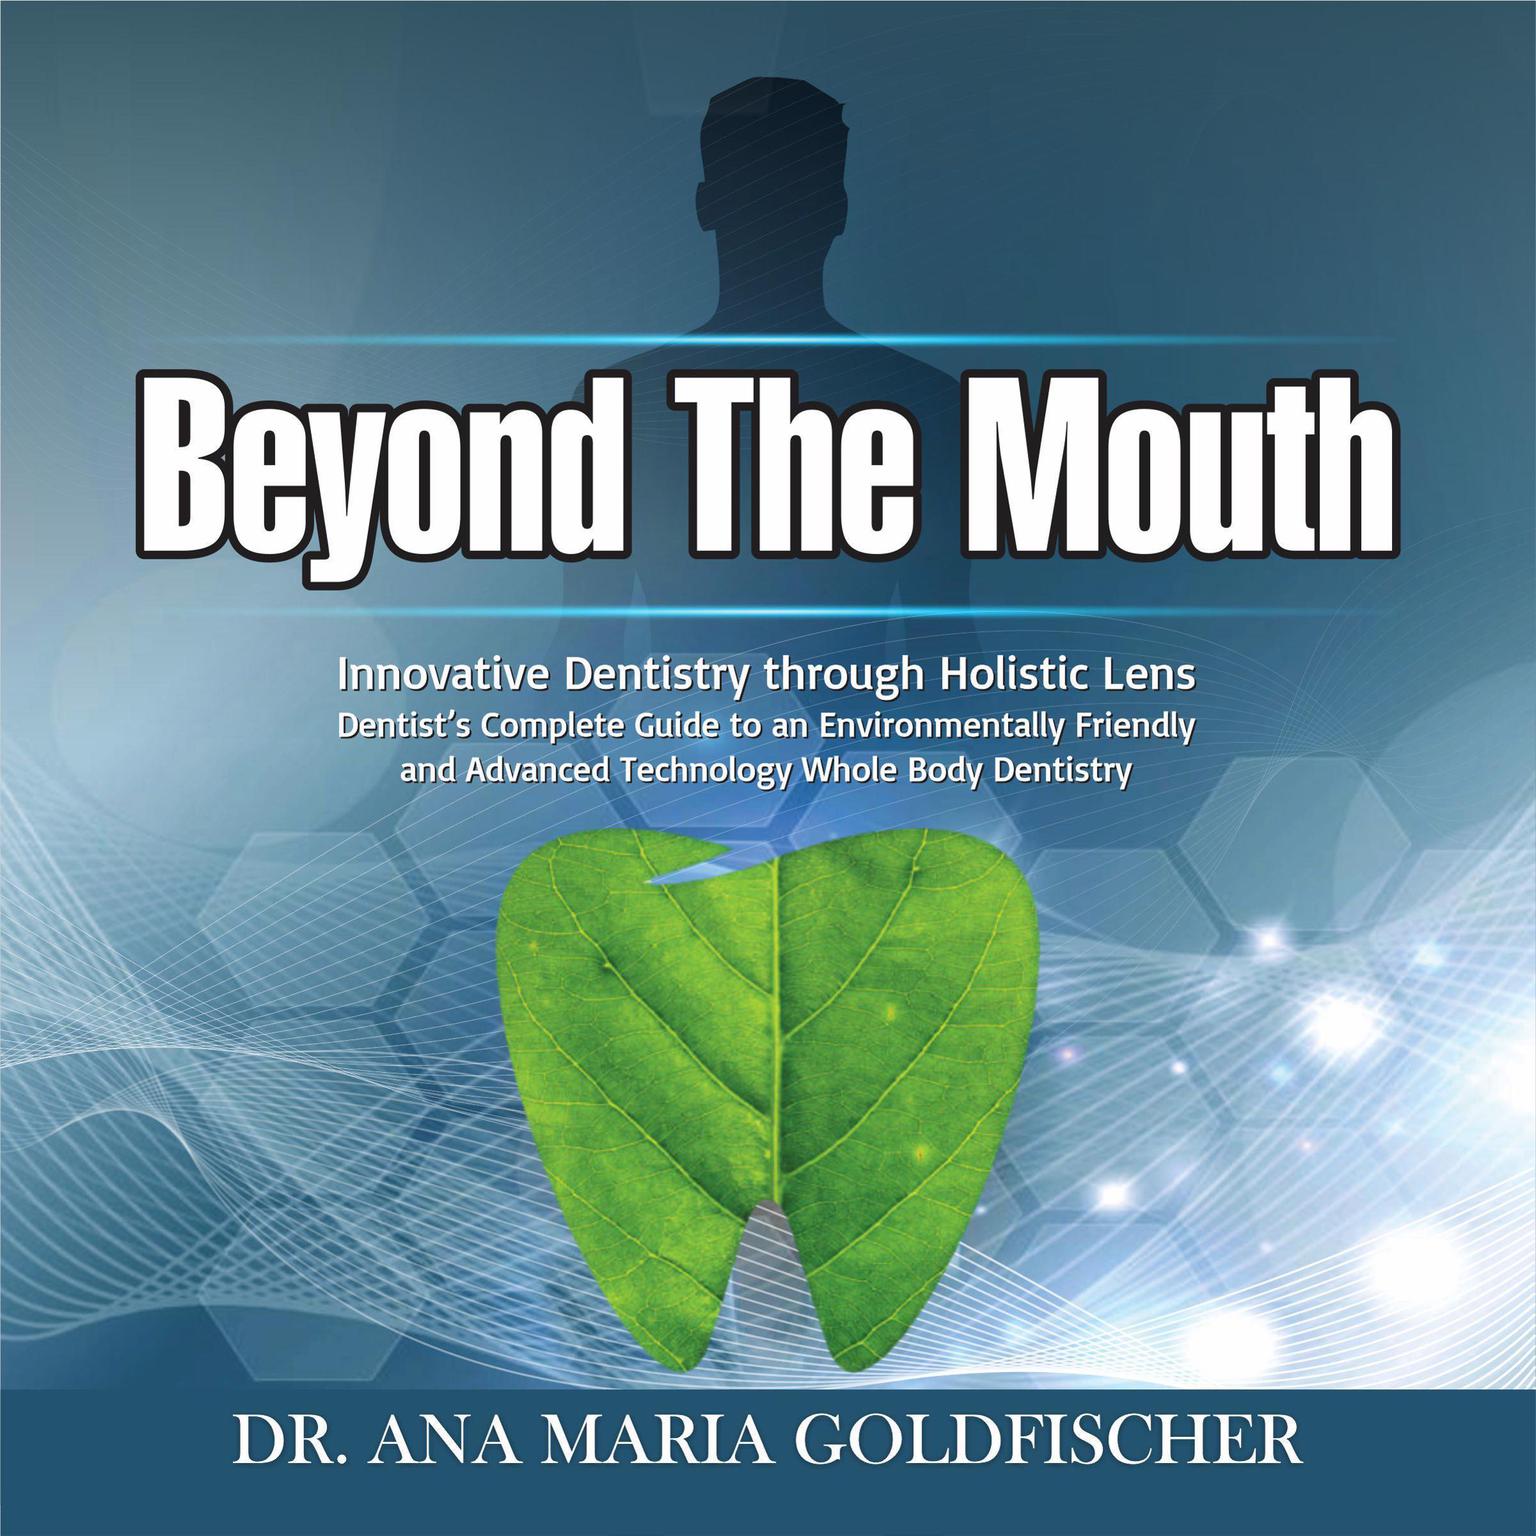 Beyond The Mouth: Innovative High Tech Dentistry through Holistic Lens. Dentist’s Complete Guide to an Environmentally Friendly and Advanced Technology Whole Body Dentistry Audiobook, by Ana Maria Goldfischer